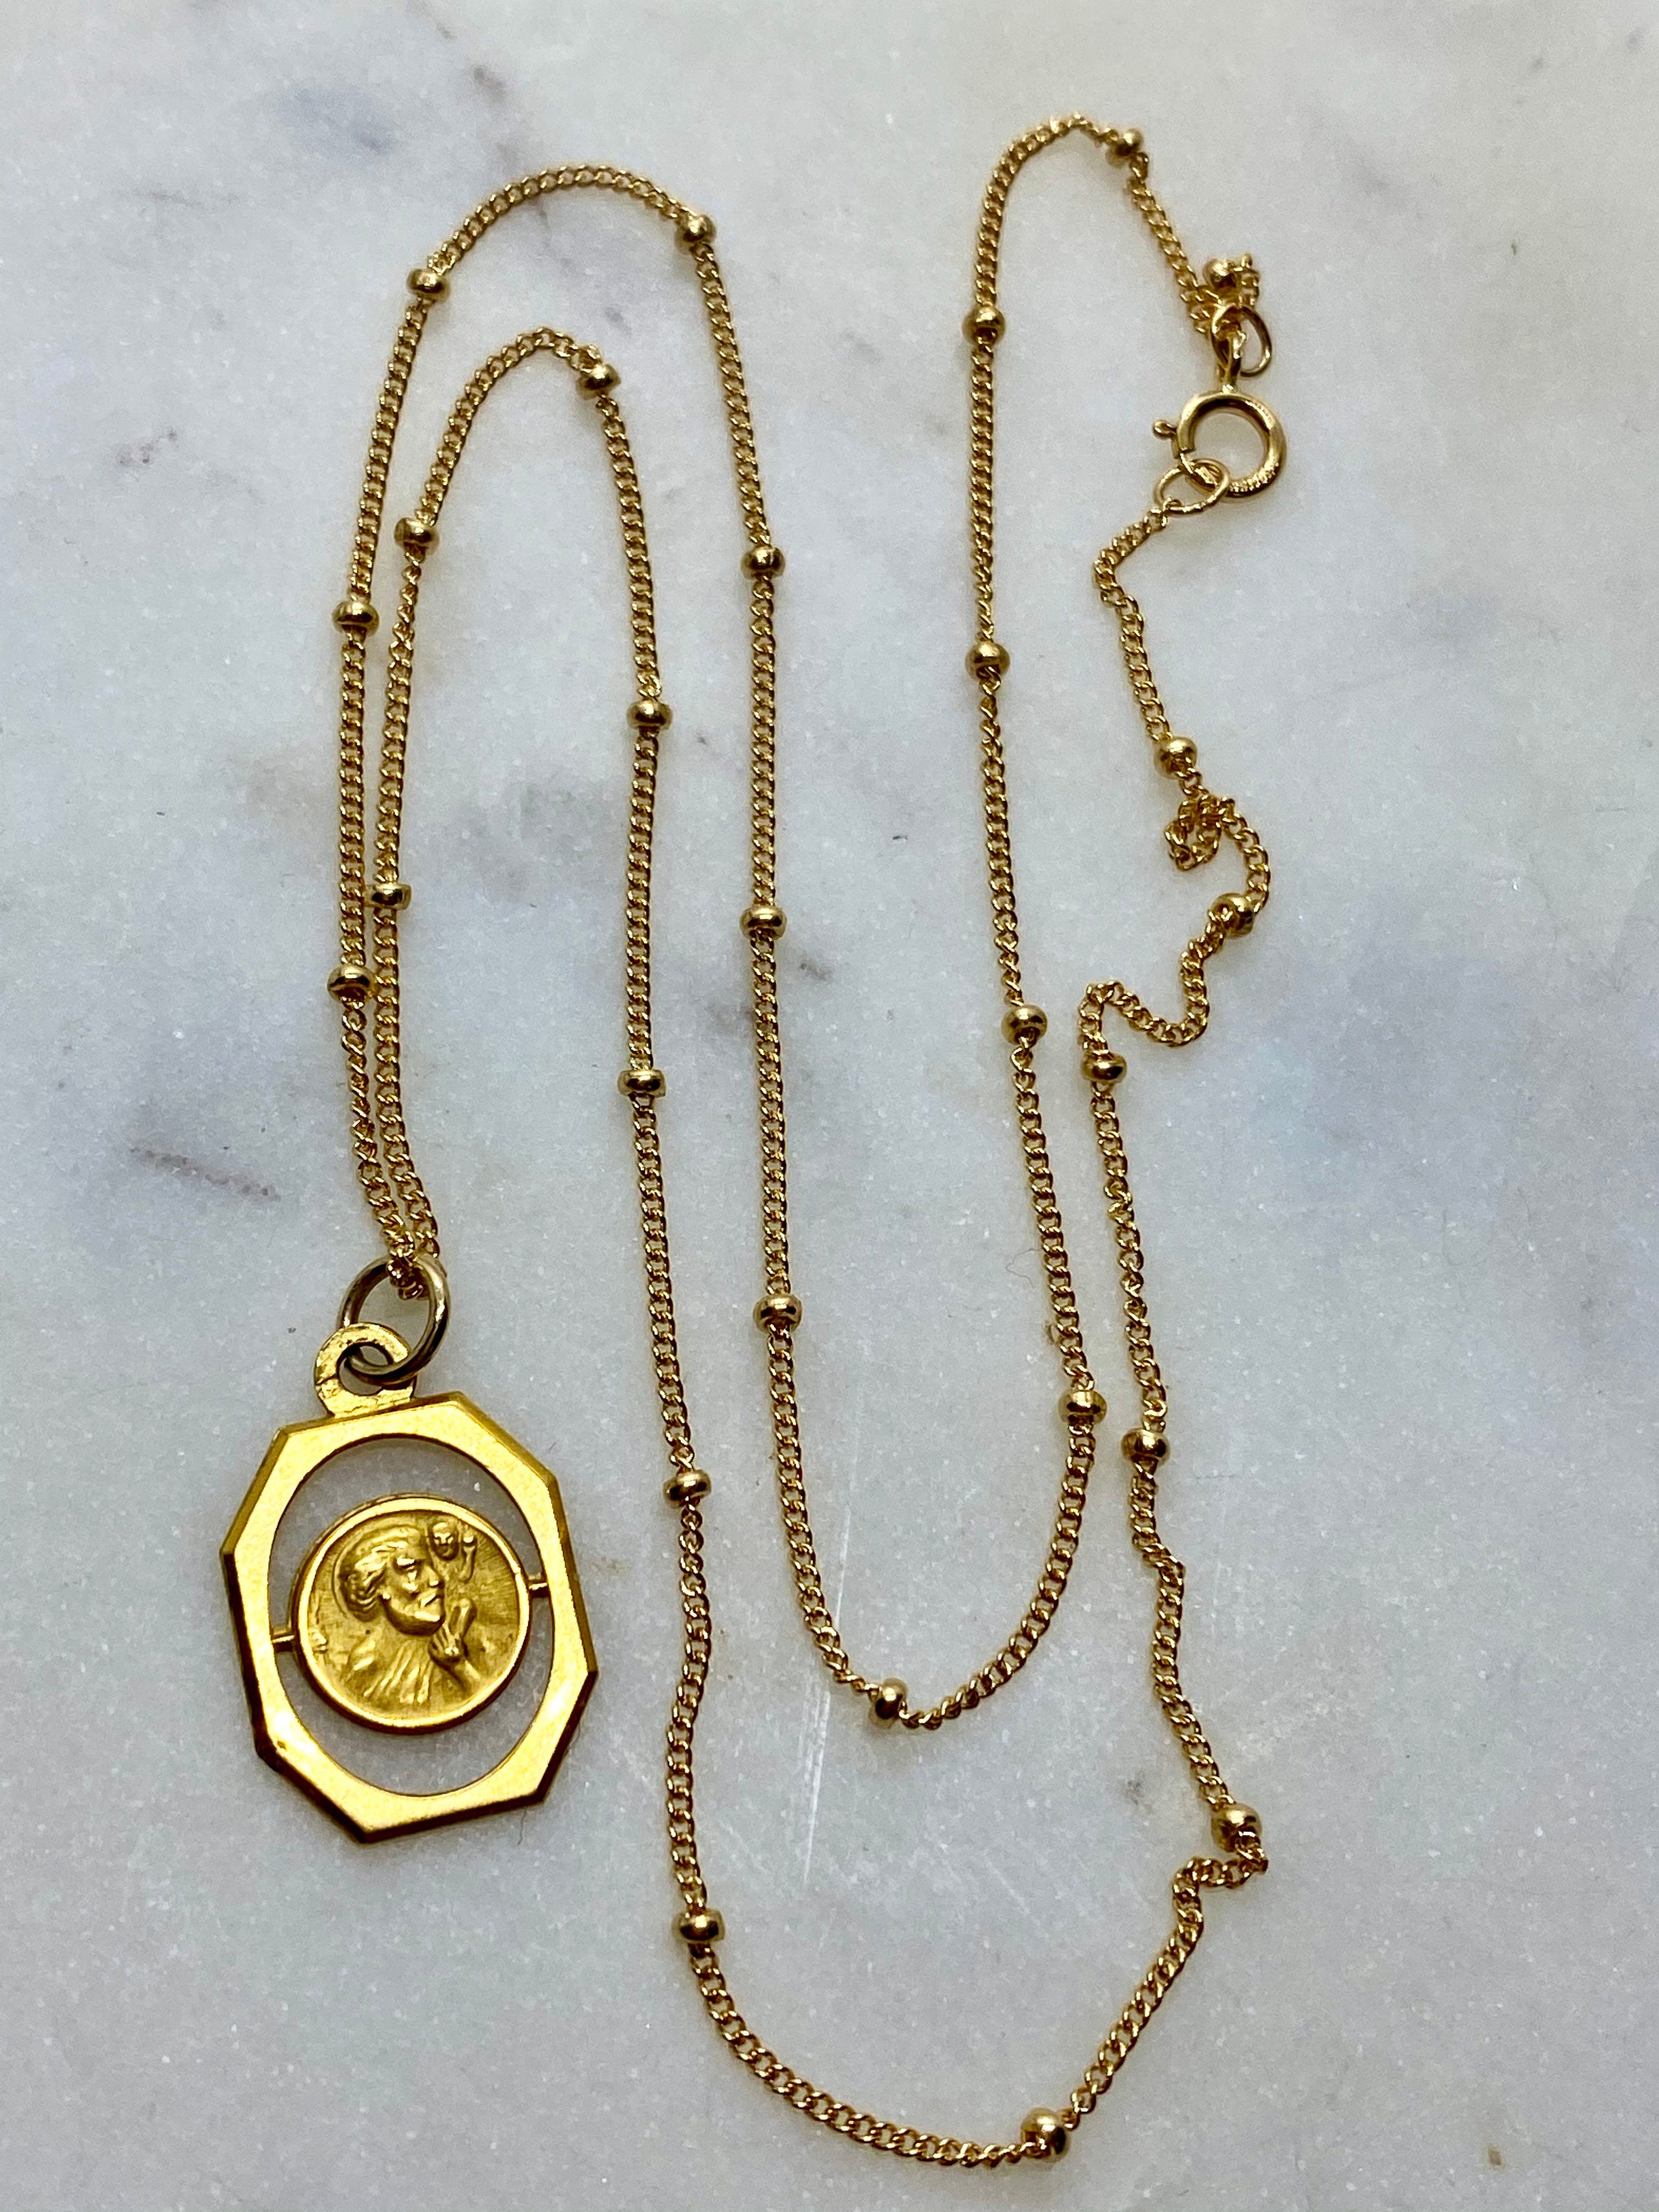 Vintage French Gold Tone St. Christopher Medal on Gold Filled Saturn Chain